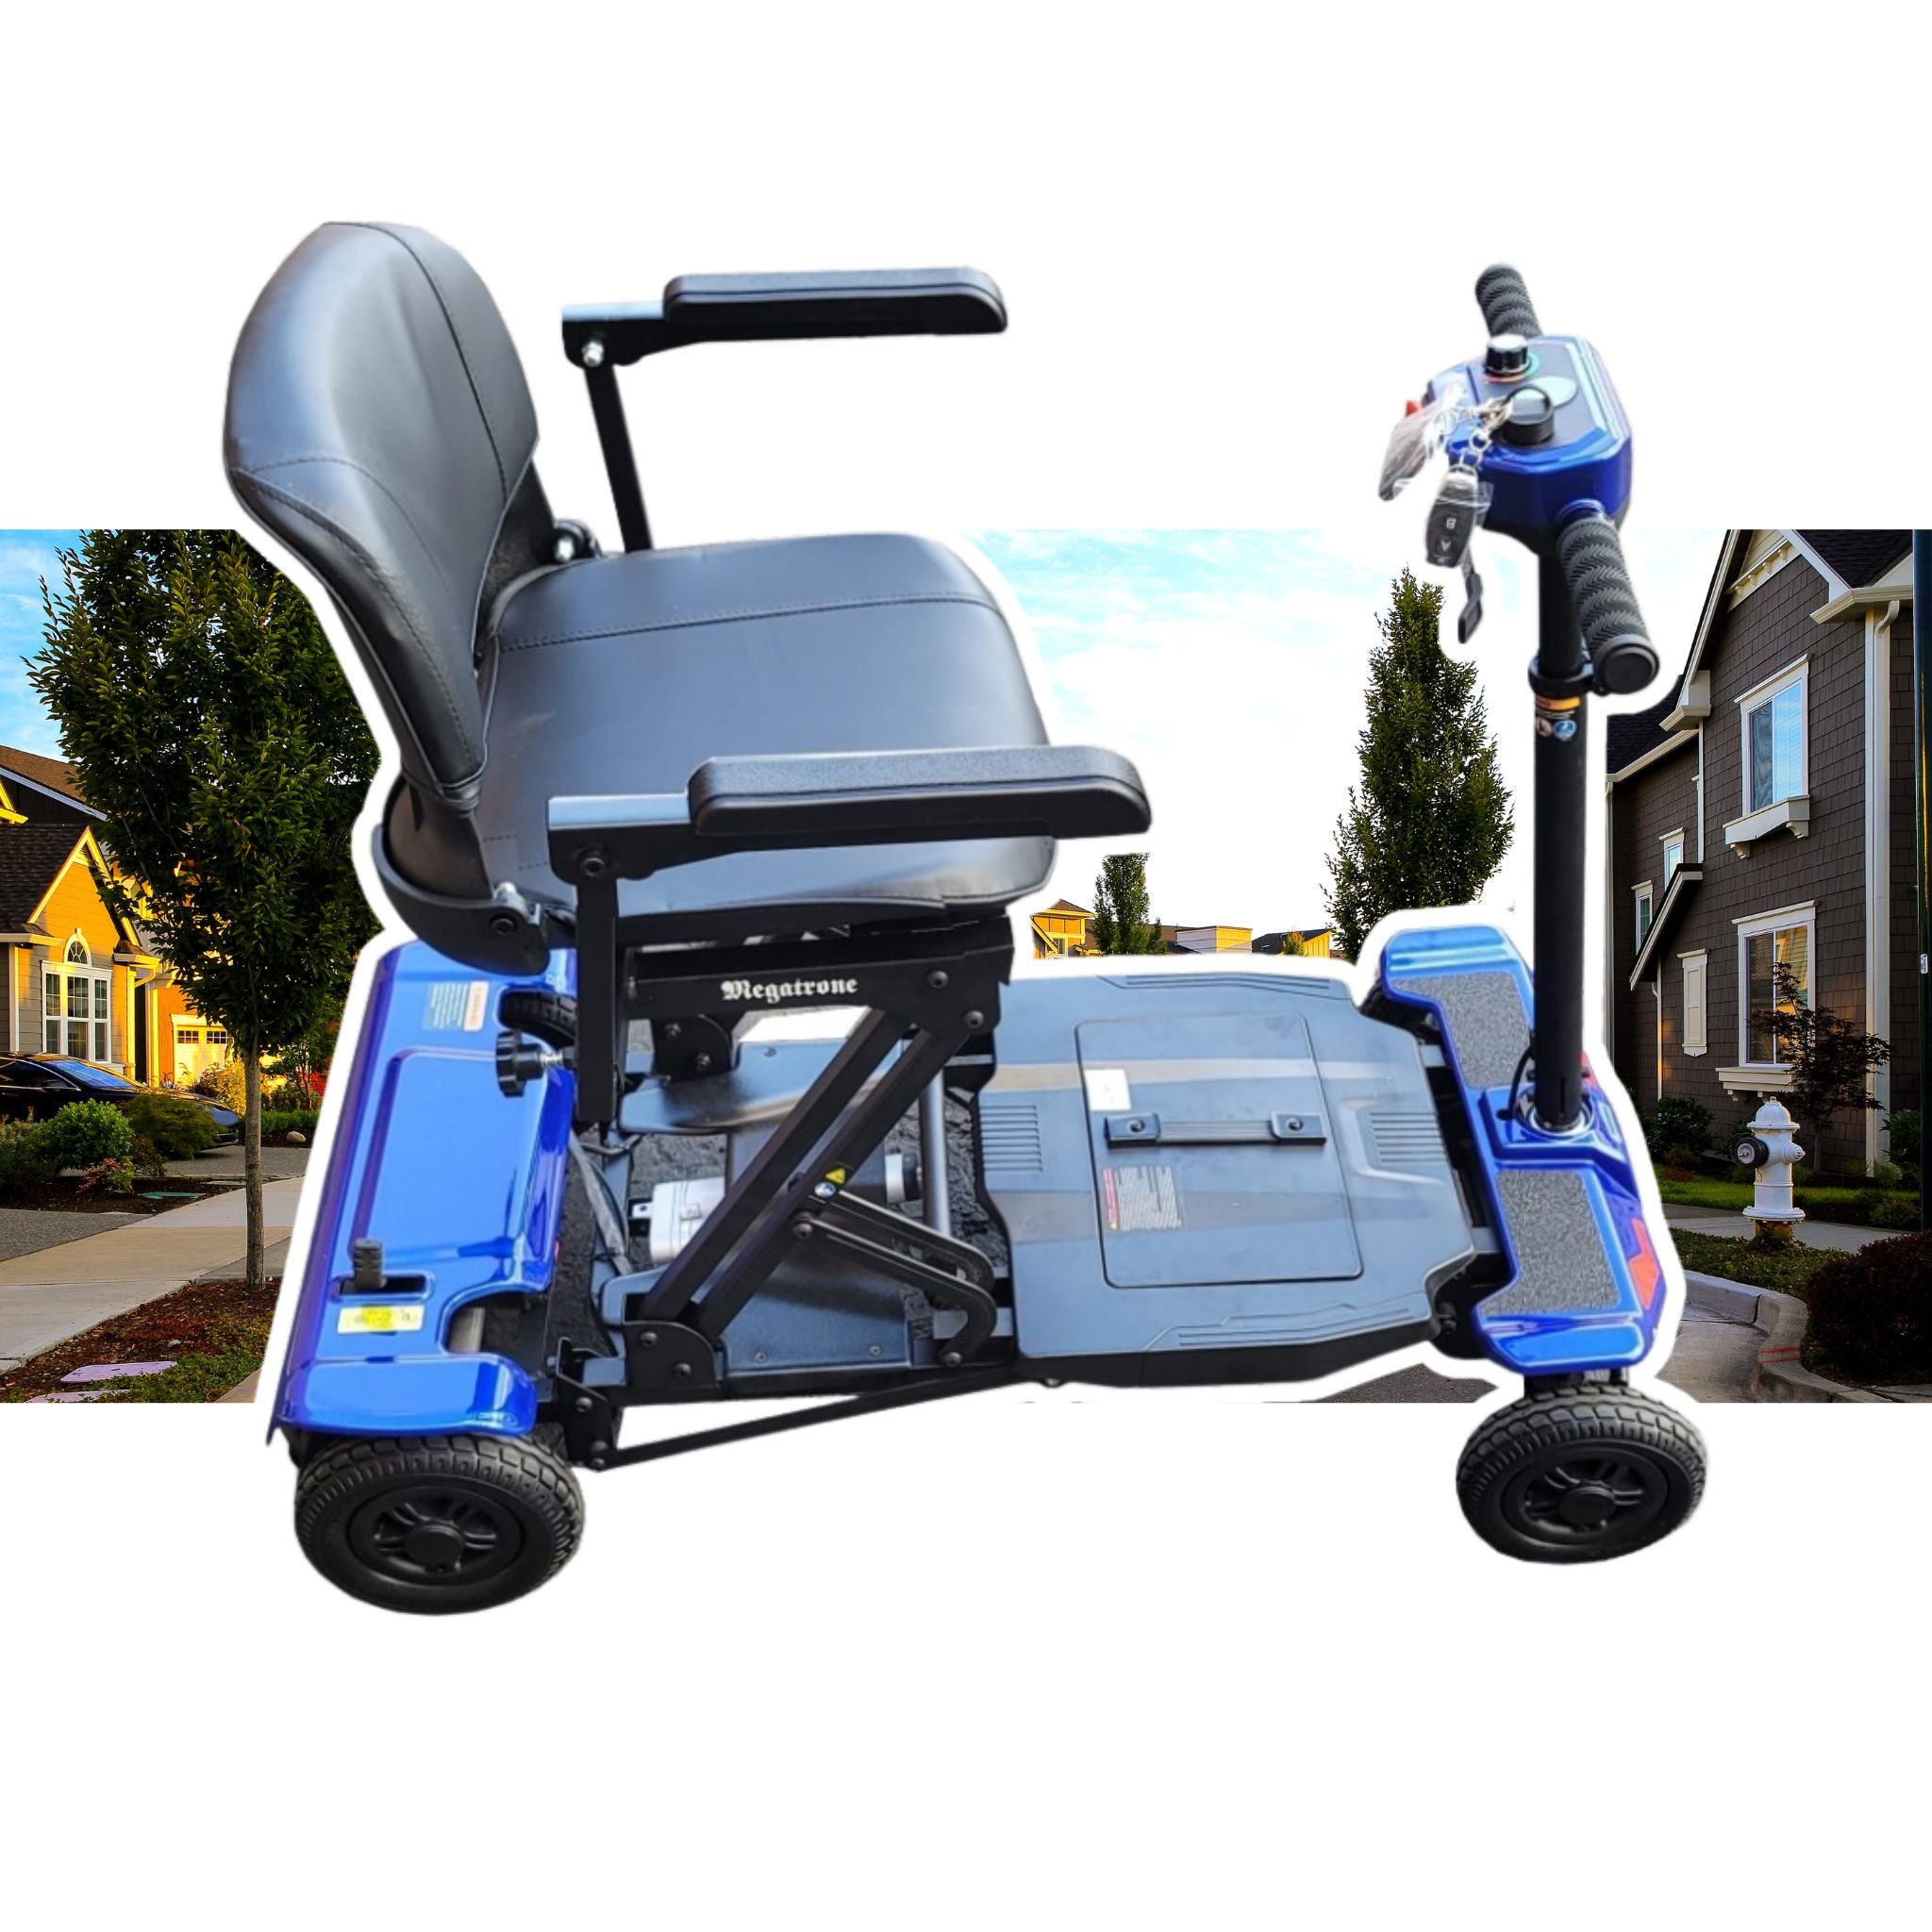 Megatrone 4 Wheel Mobility Scooter